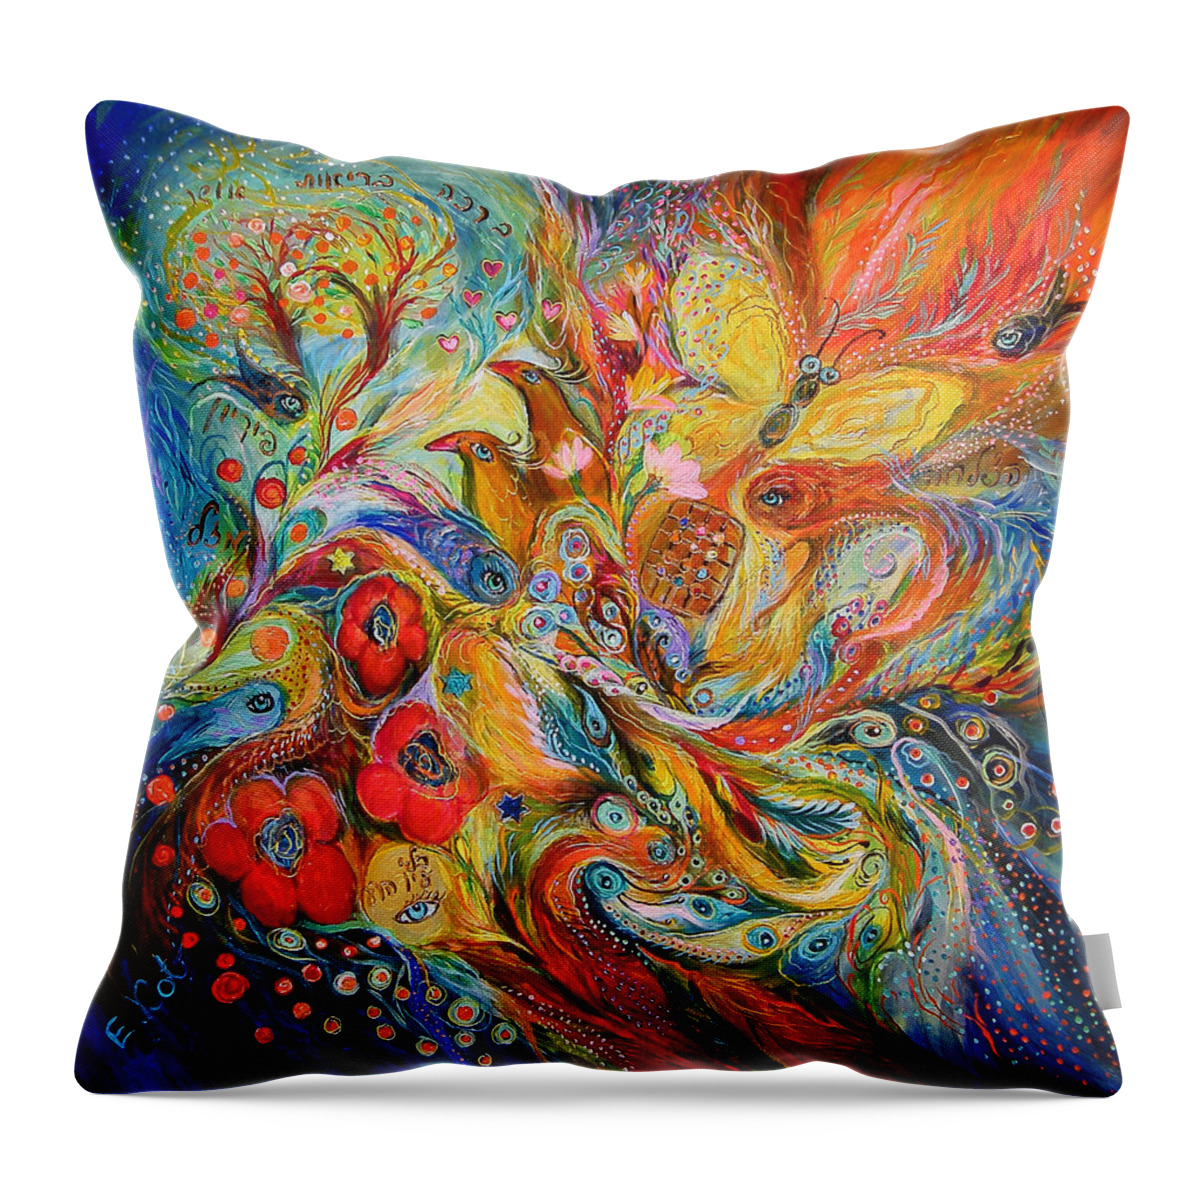 Original Throw Pillow featuring the painting The Passion of Ultramarine by Elena Kotliarker